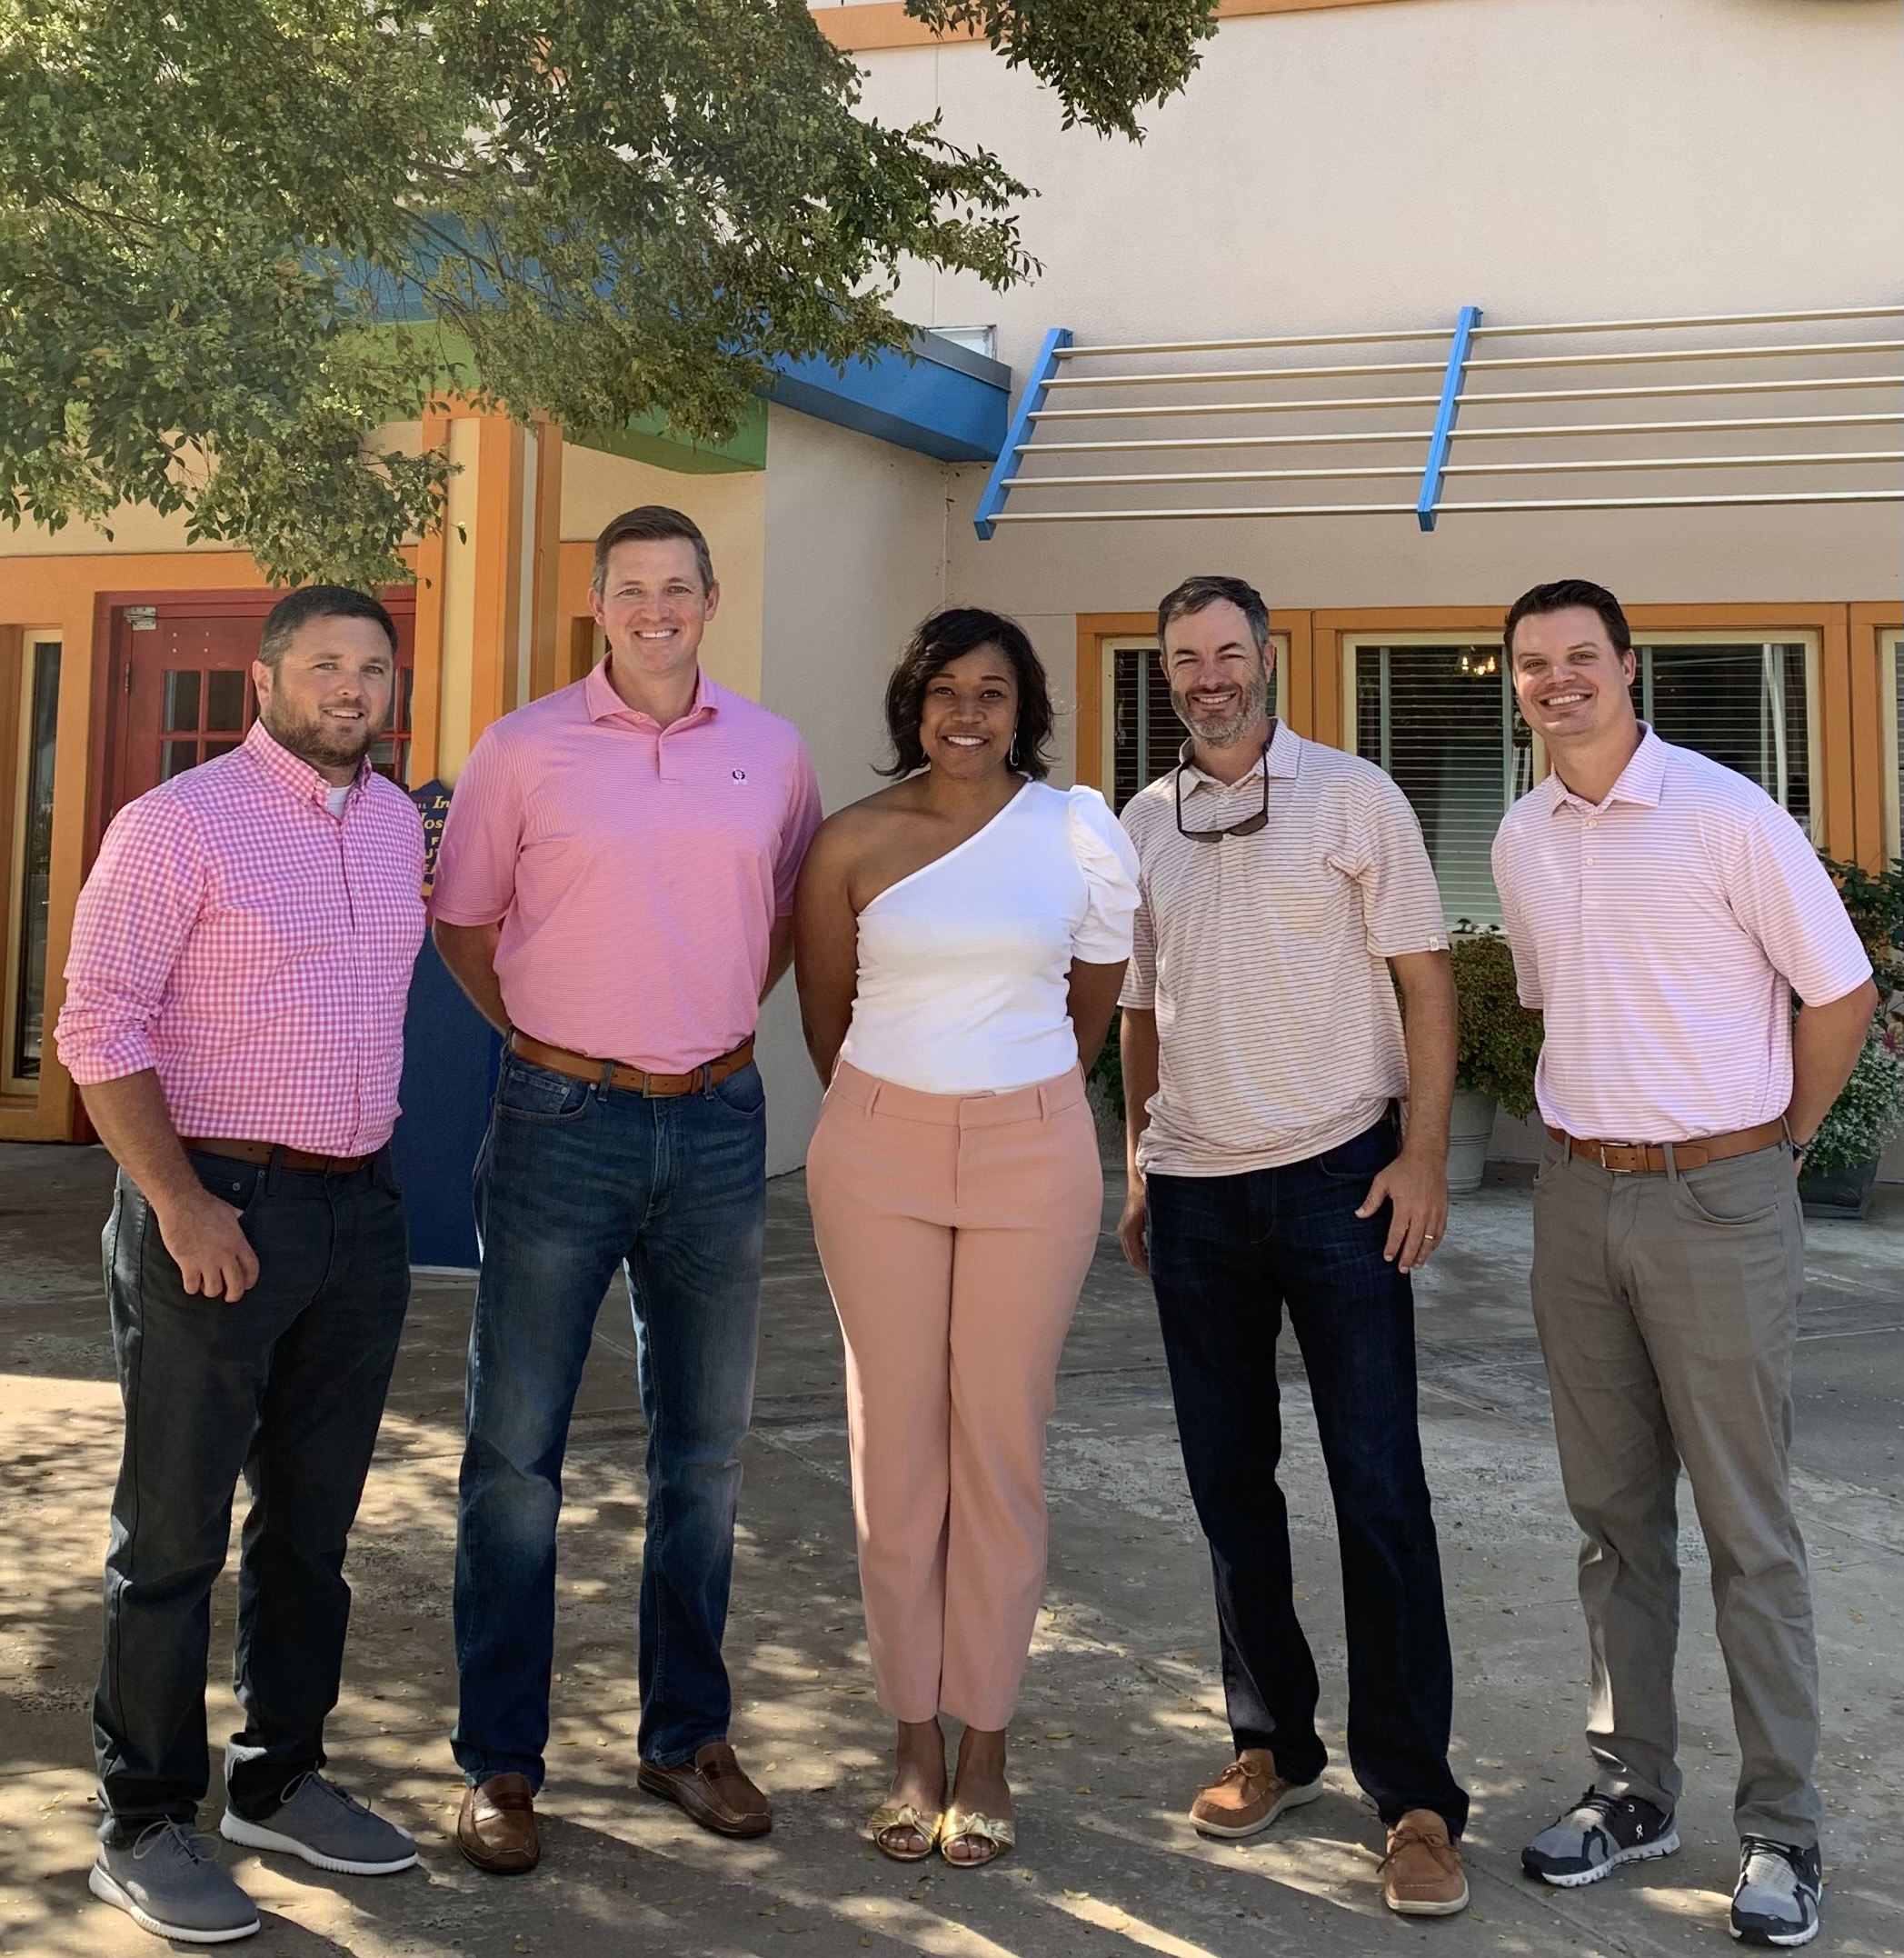 " We support Breast Cancer Awareness because increased awareness has proven effective to increase screenings, which increases early detection and the chances our loved ones will survive. "- Jeremy Prickett, Special Projects Manager, Power Delivery Project Management